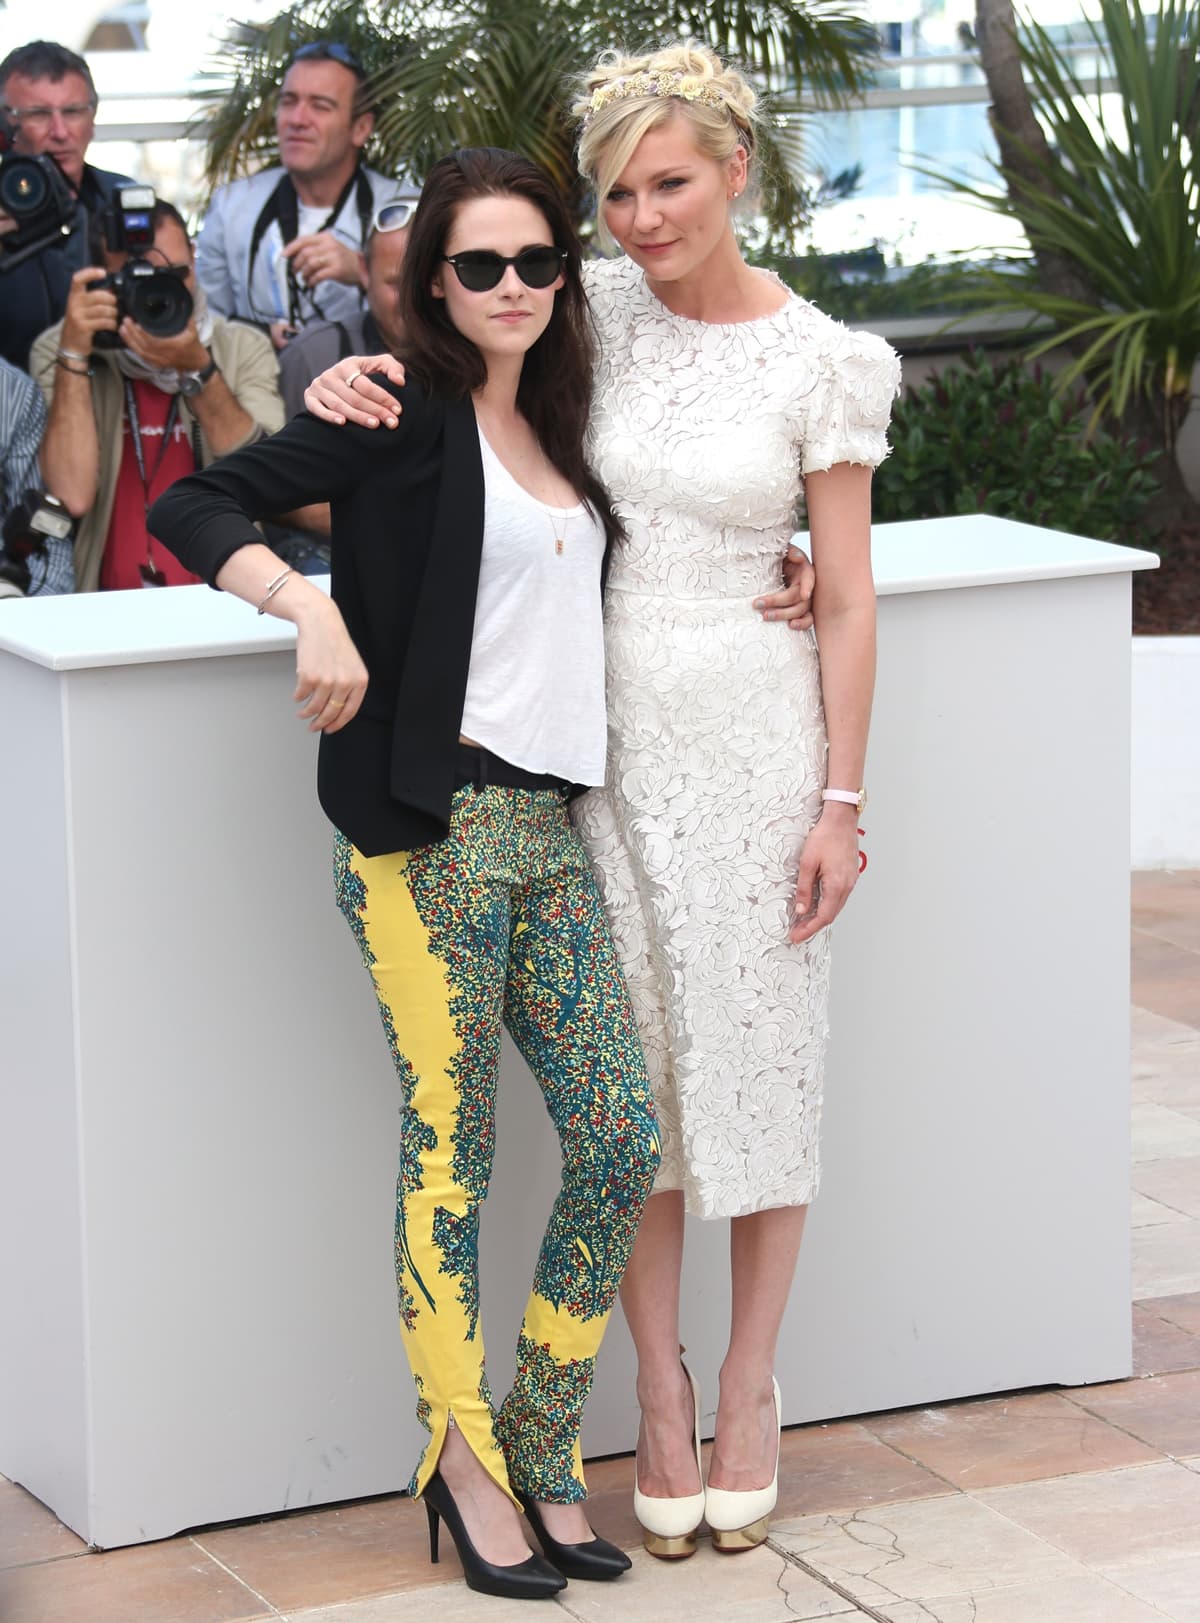 Kristen Stewart and Kirsten Dunst attend the On The Road Photocall during the 65th Annual Cannes Film Festival at Palais des Festivals on May 23, 2012 in Cannes, France